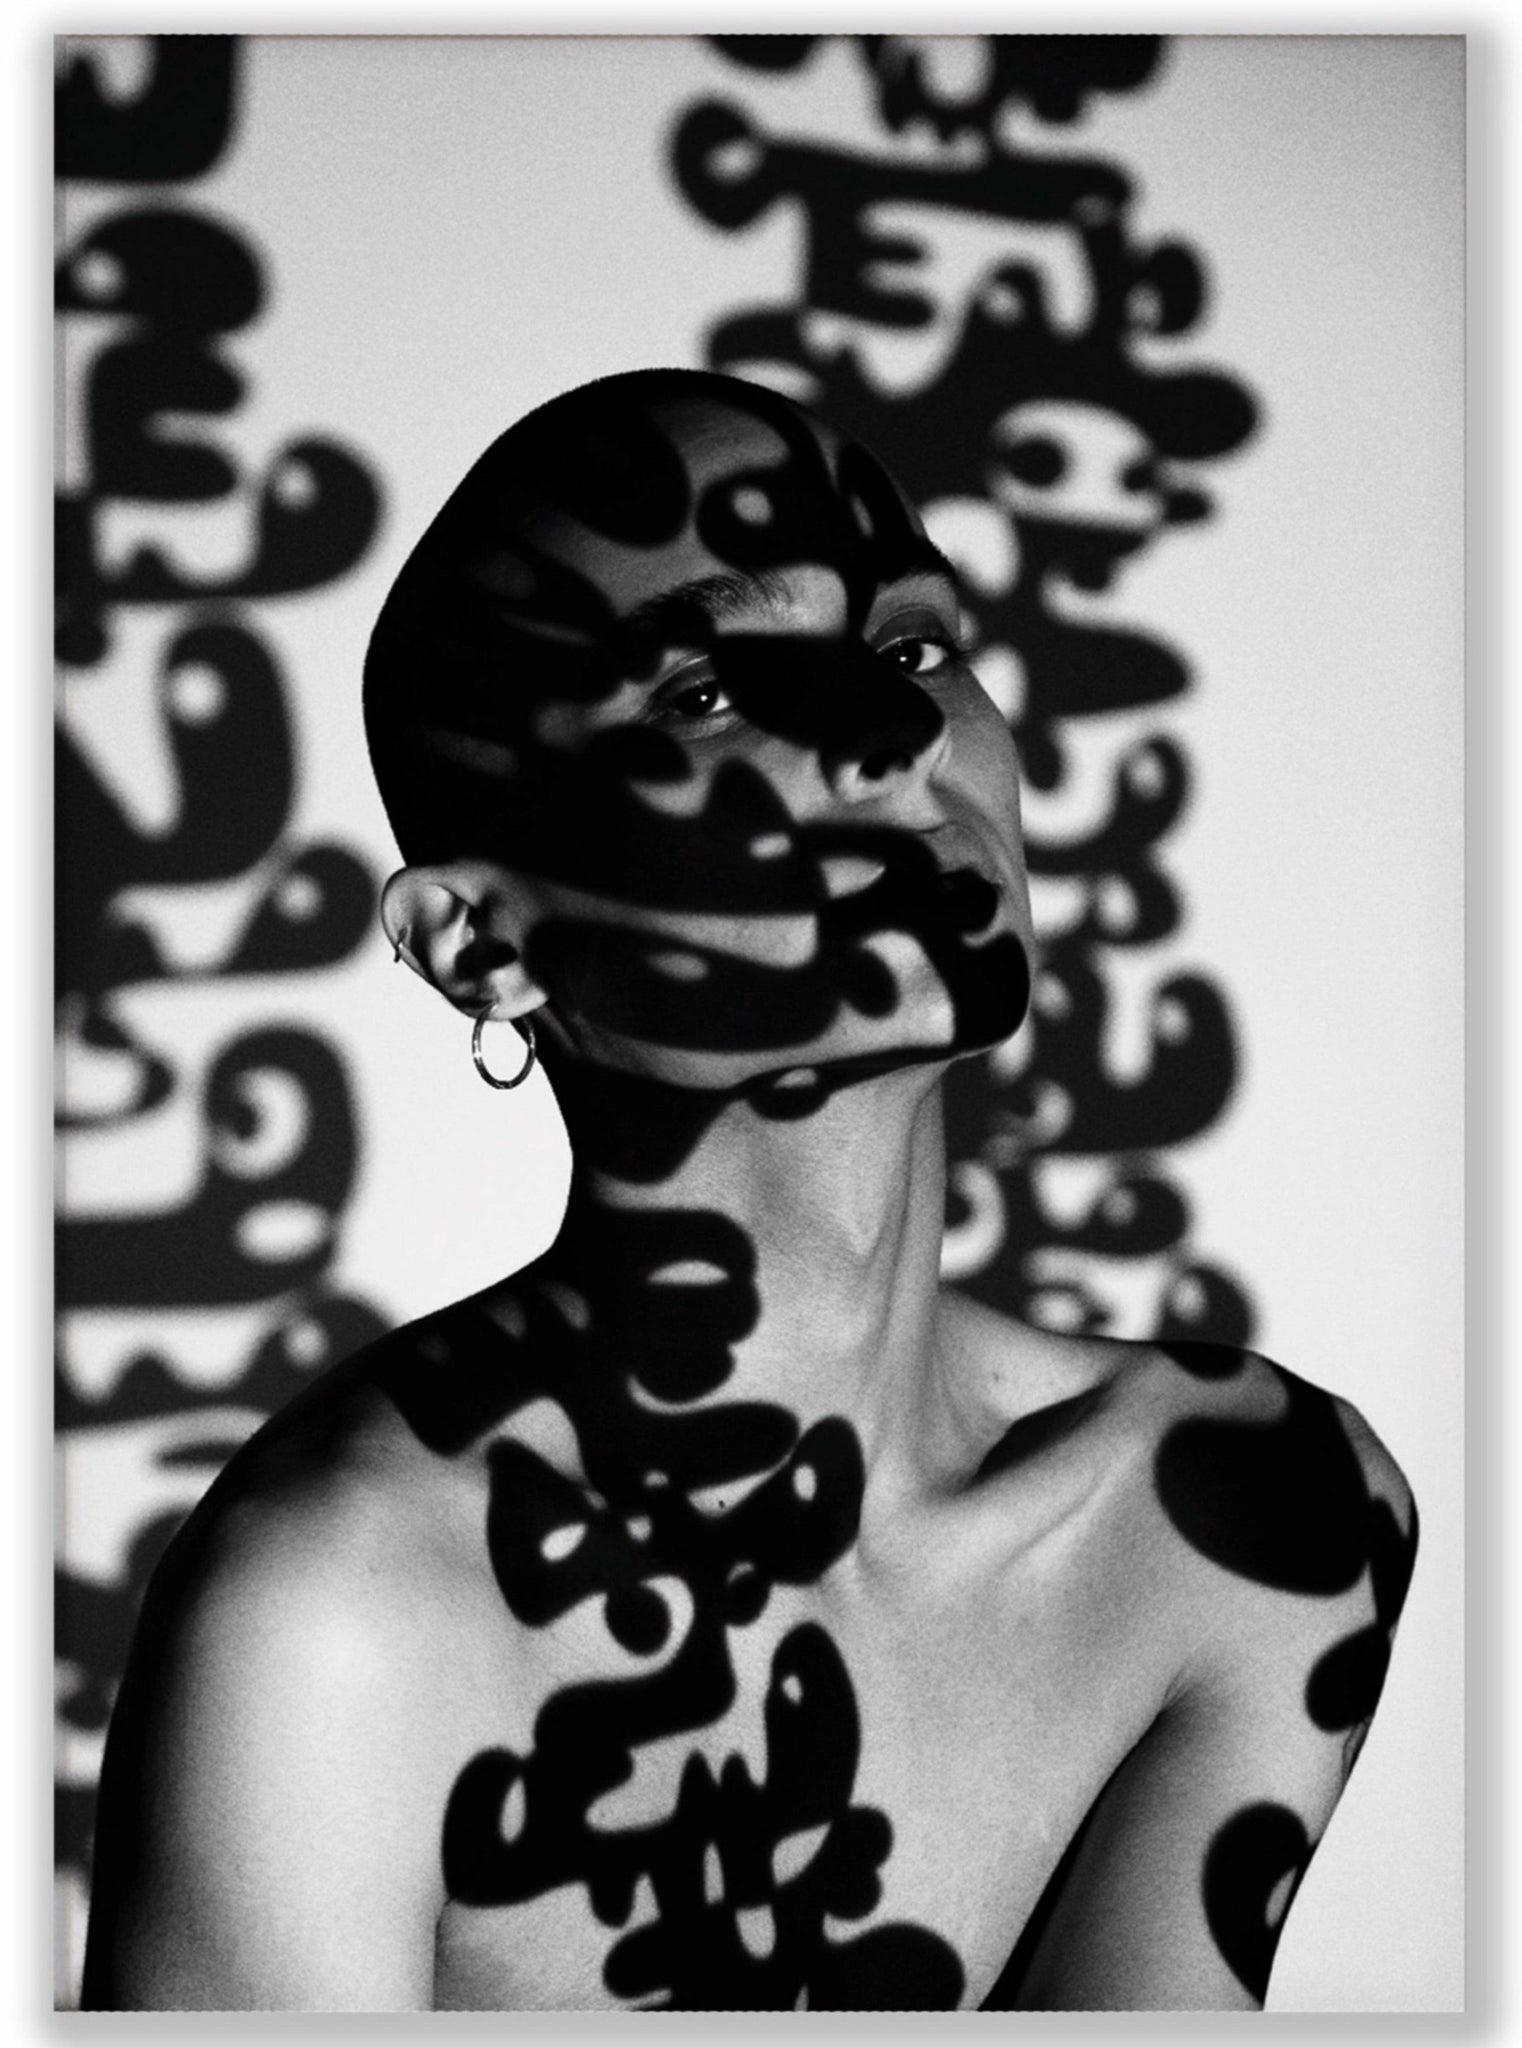 Black and white limited edition giclée print